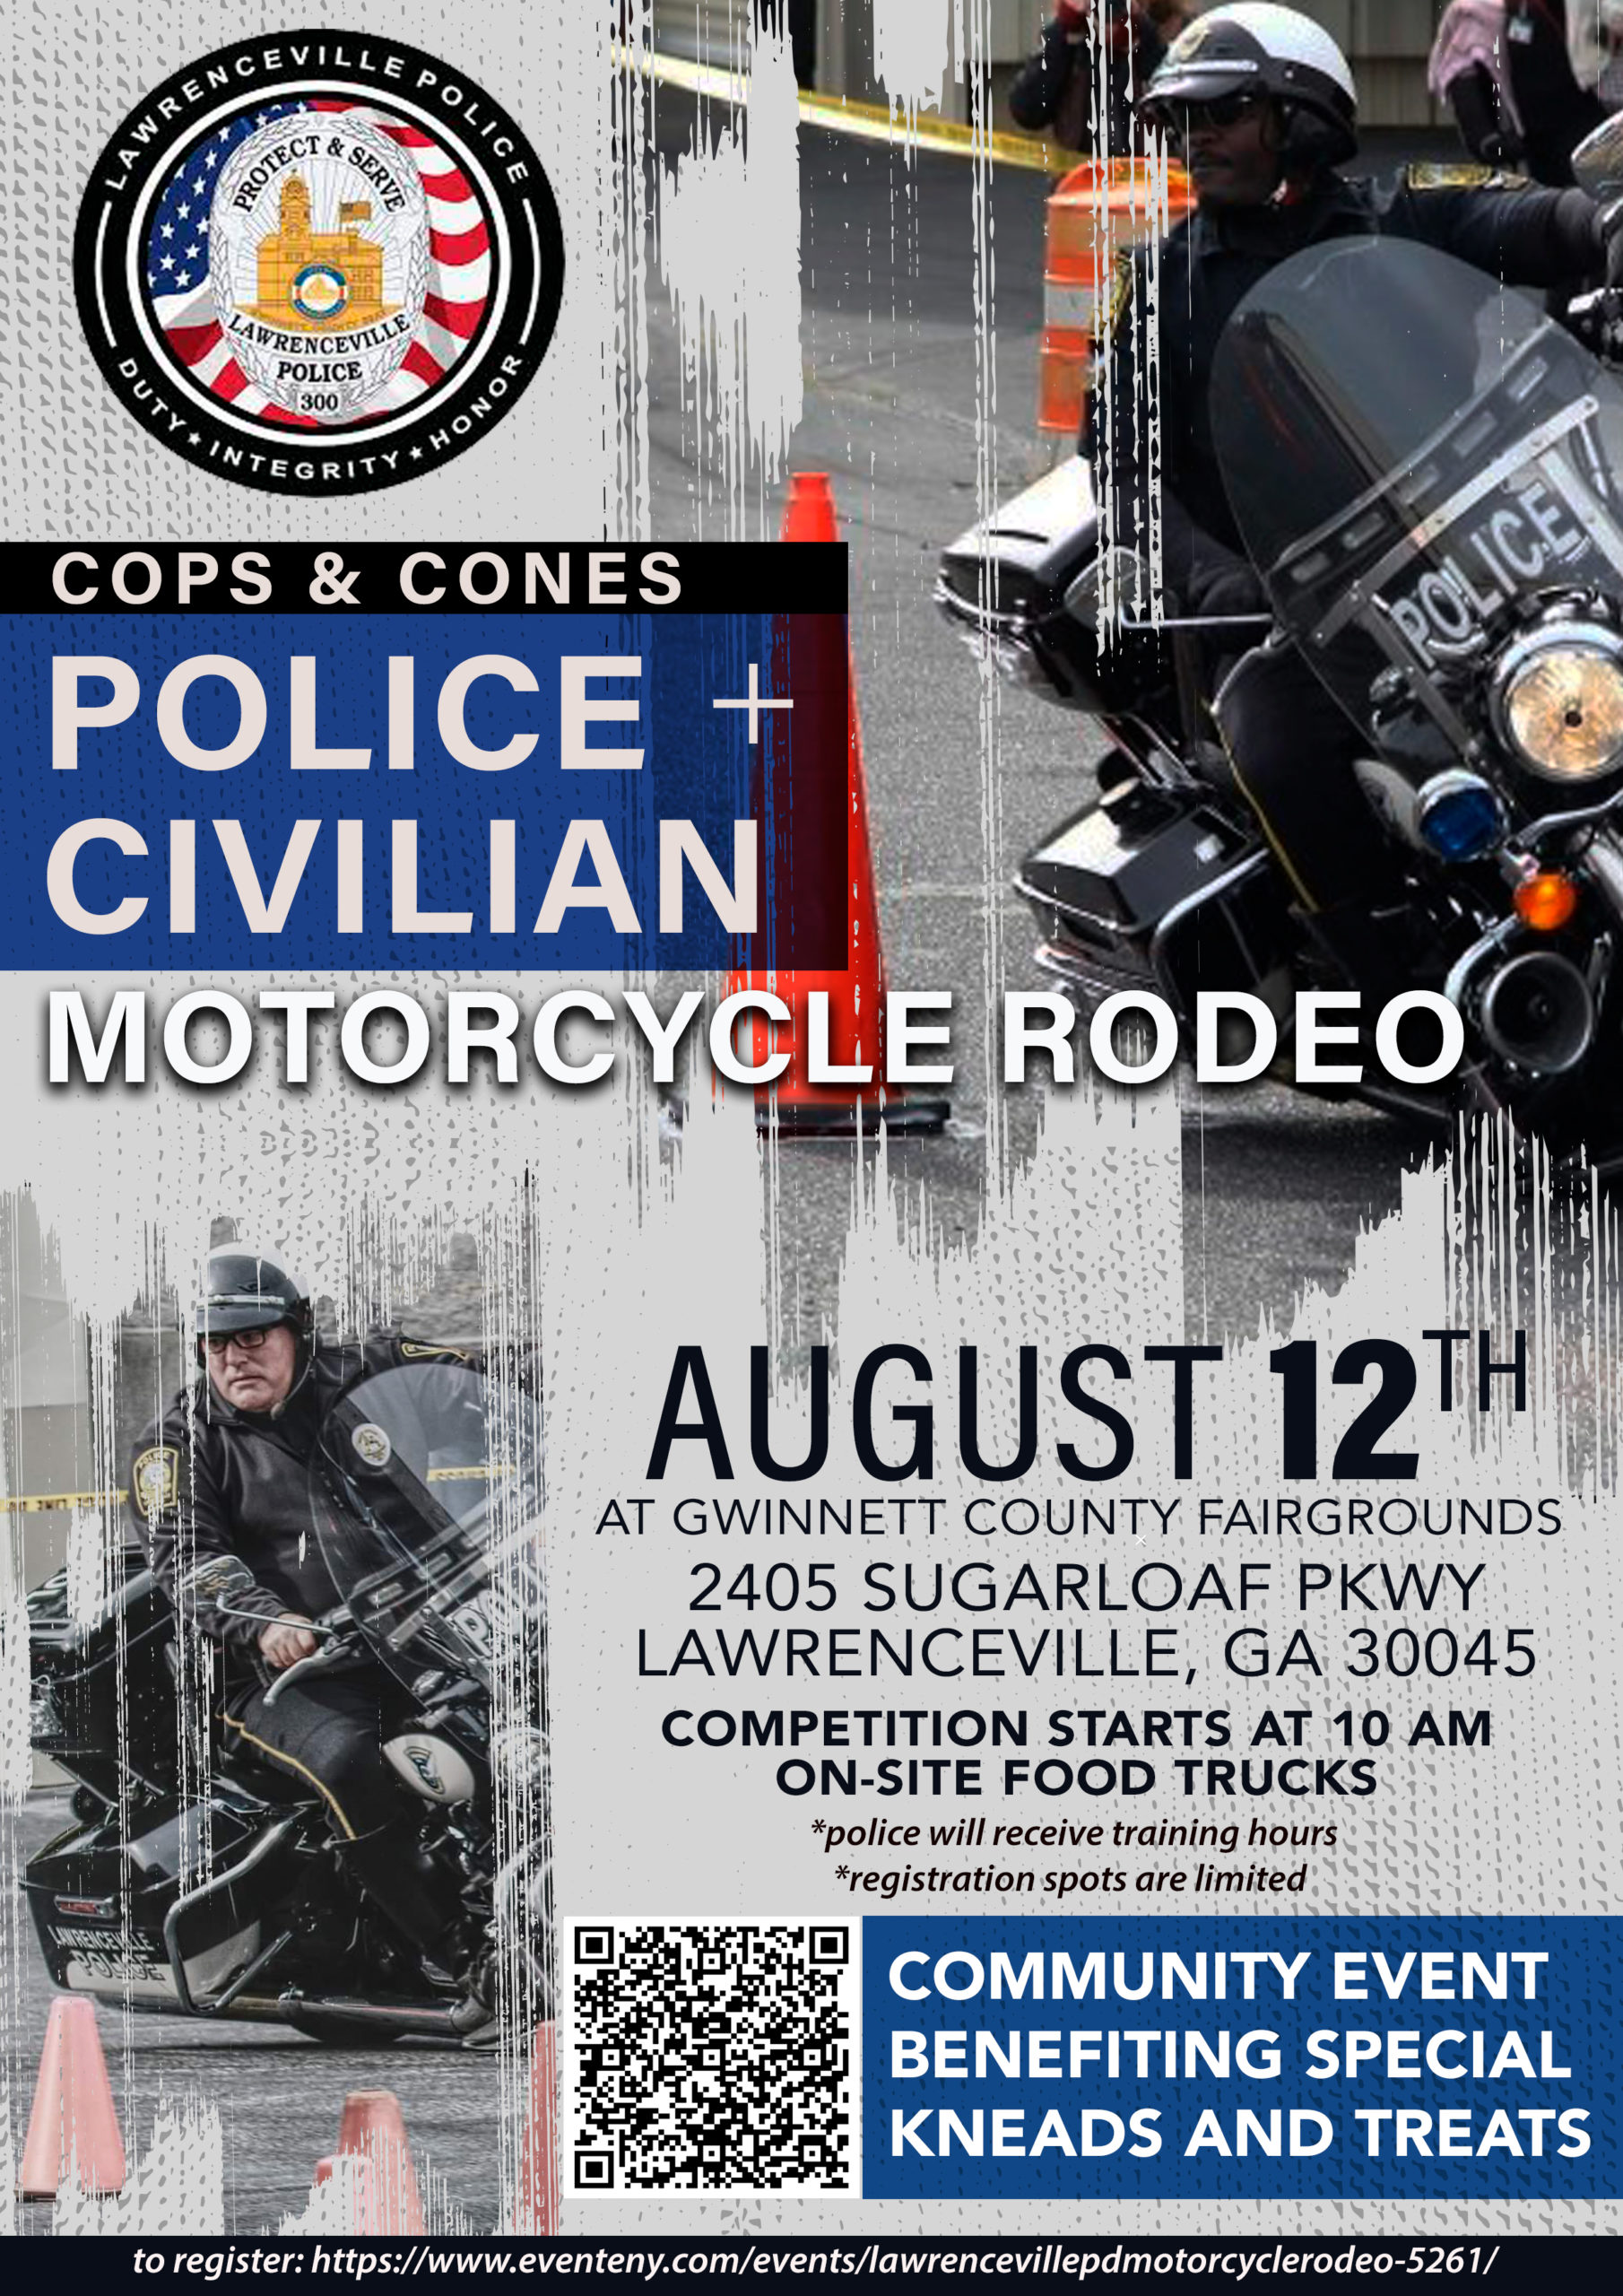 Cops & Cones Police + Civilian Motorcycle Rodeo, August 12th at Gwinnett County Fairgrounds, 2405 Sugarloaf Pkwy Lawrenceville, GA 30045. Competition starts at 10 AM, on-site food trucks. Police will receive training hours, registration spots are limited. Community event benefiting Special Kneads and Treats. To register: https://www.eventy.com/events/lawrencevillepdmotorcyclerodeo-5261/